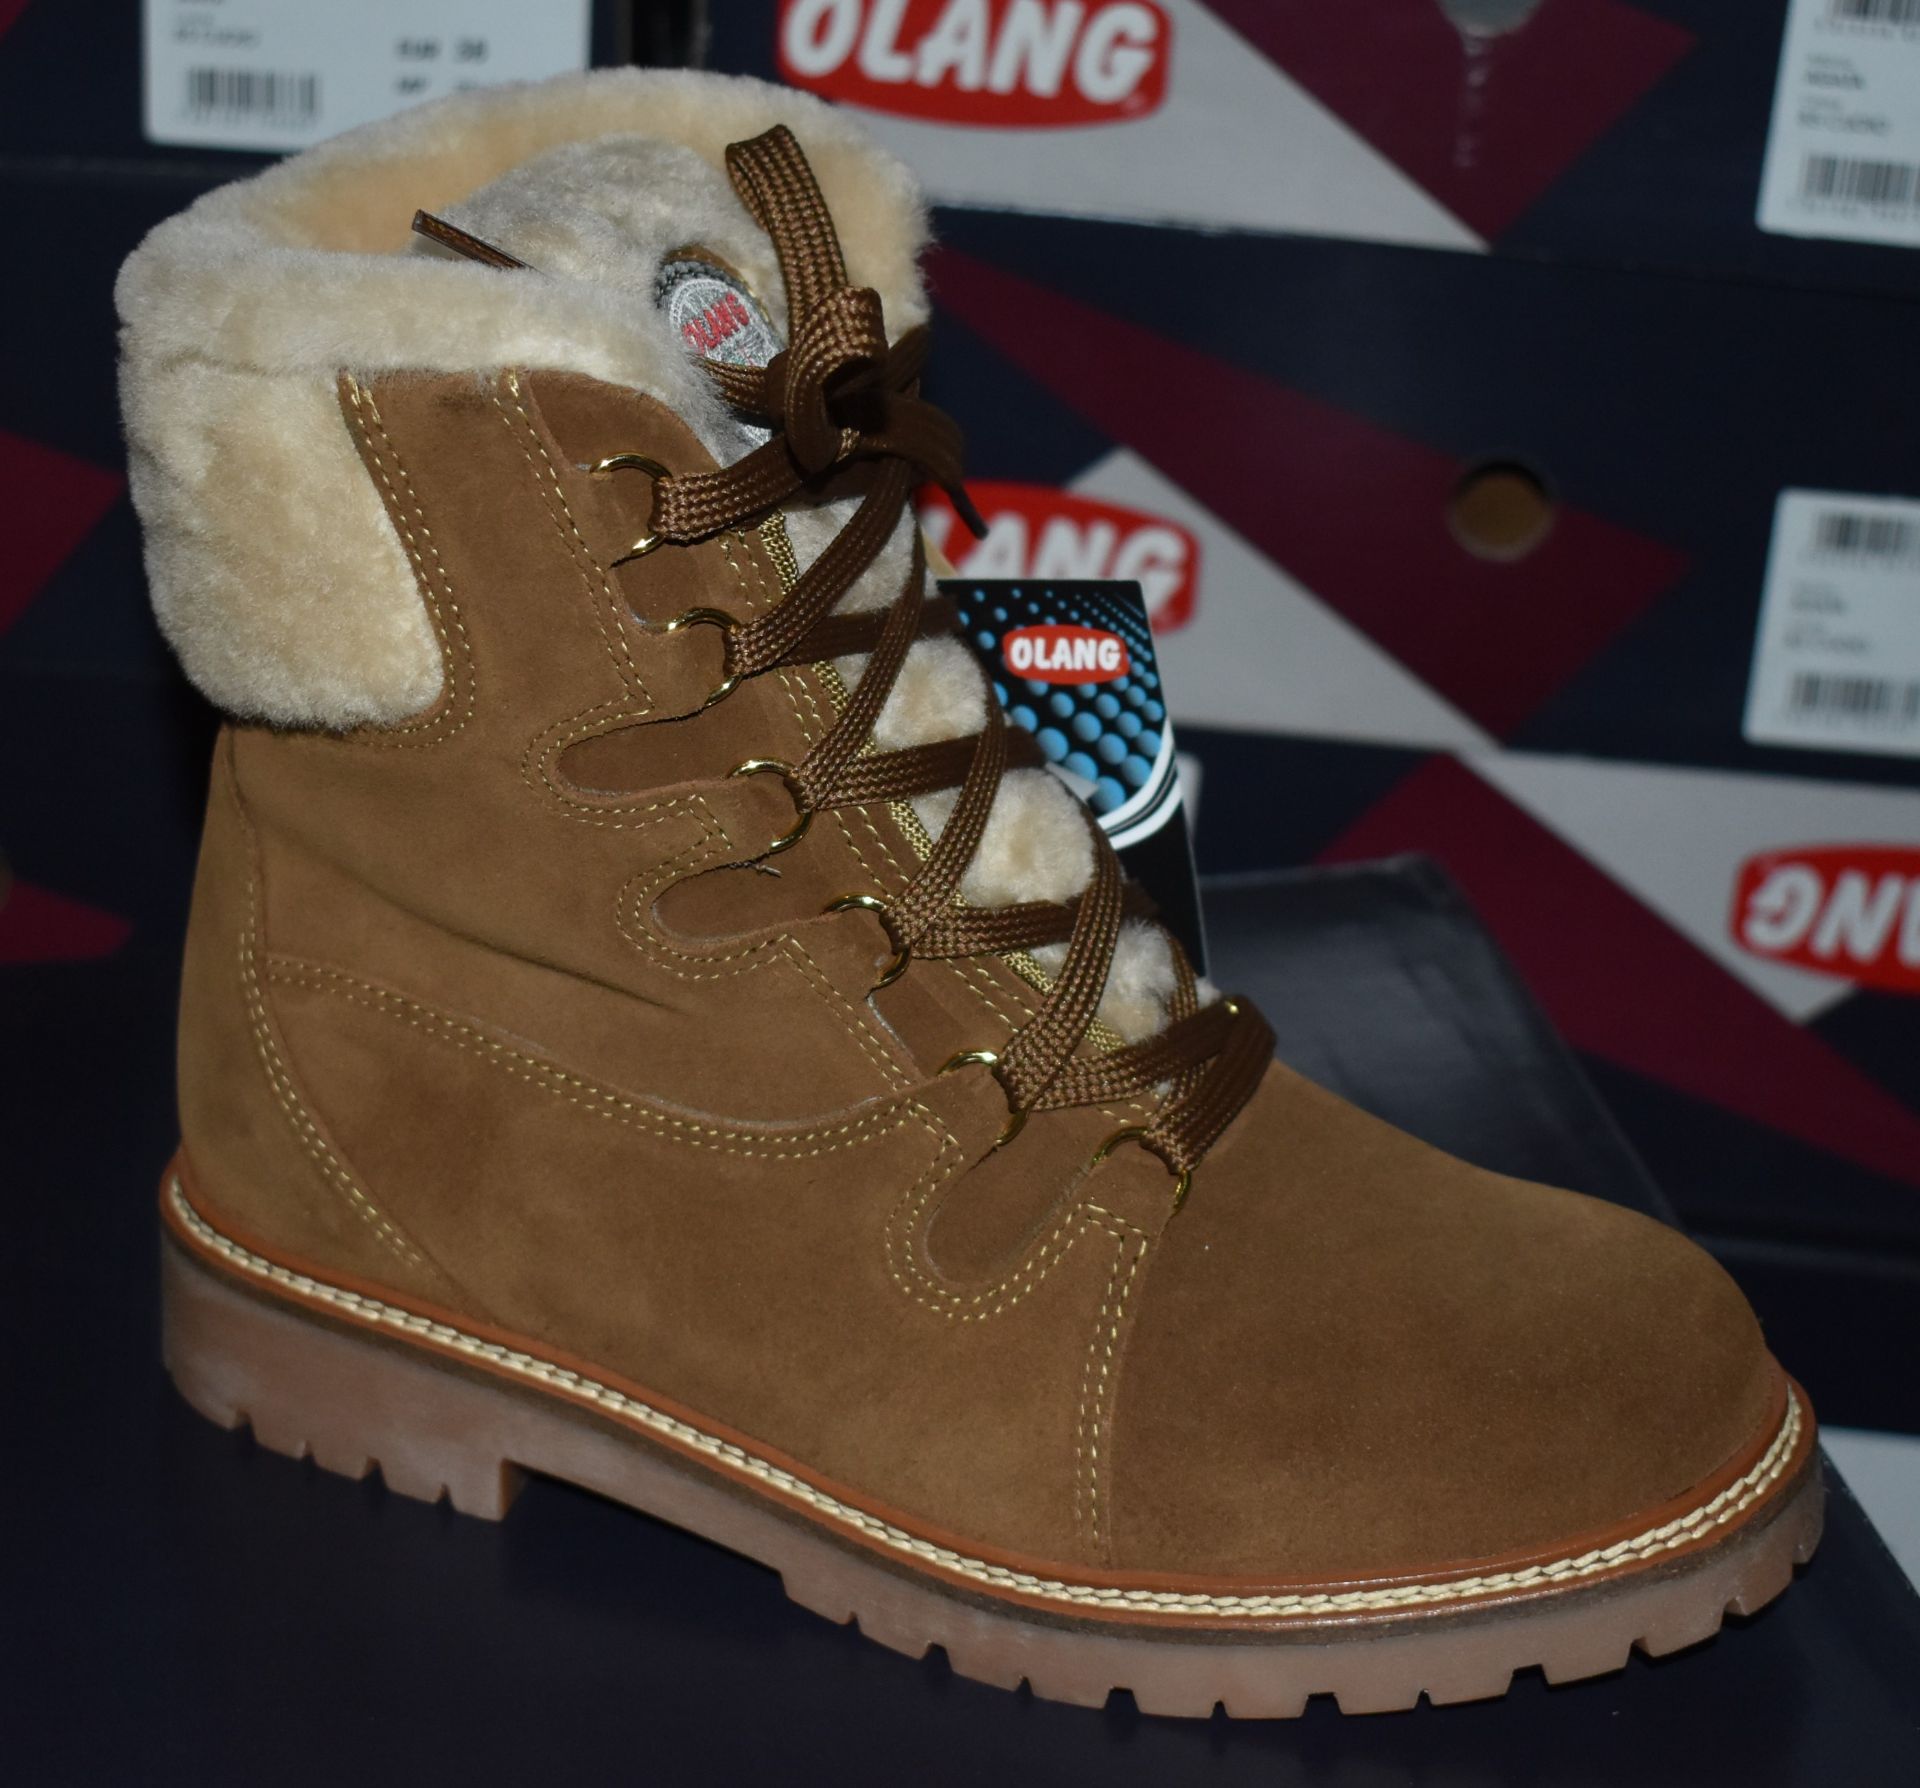 1 x Pair of Designer Olang Meribel 85 CUOIO Women's Winter Boots - Euro Size 37 - Brand New Boxed - Image 2 of 8